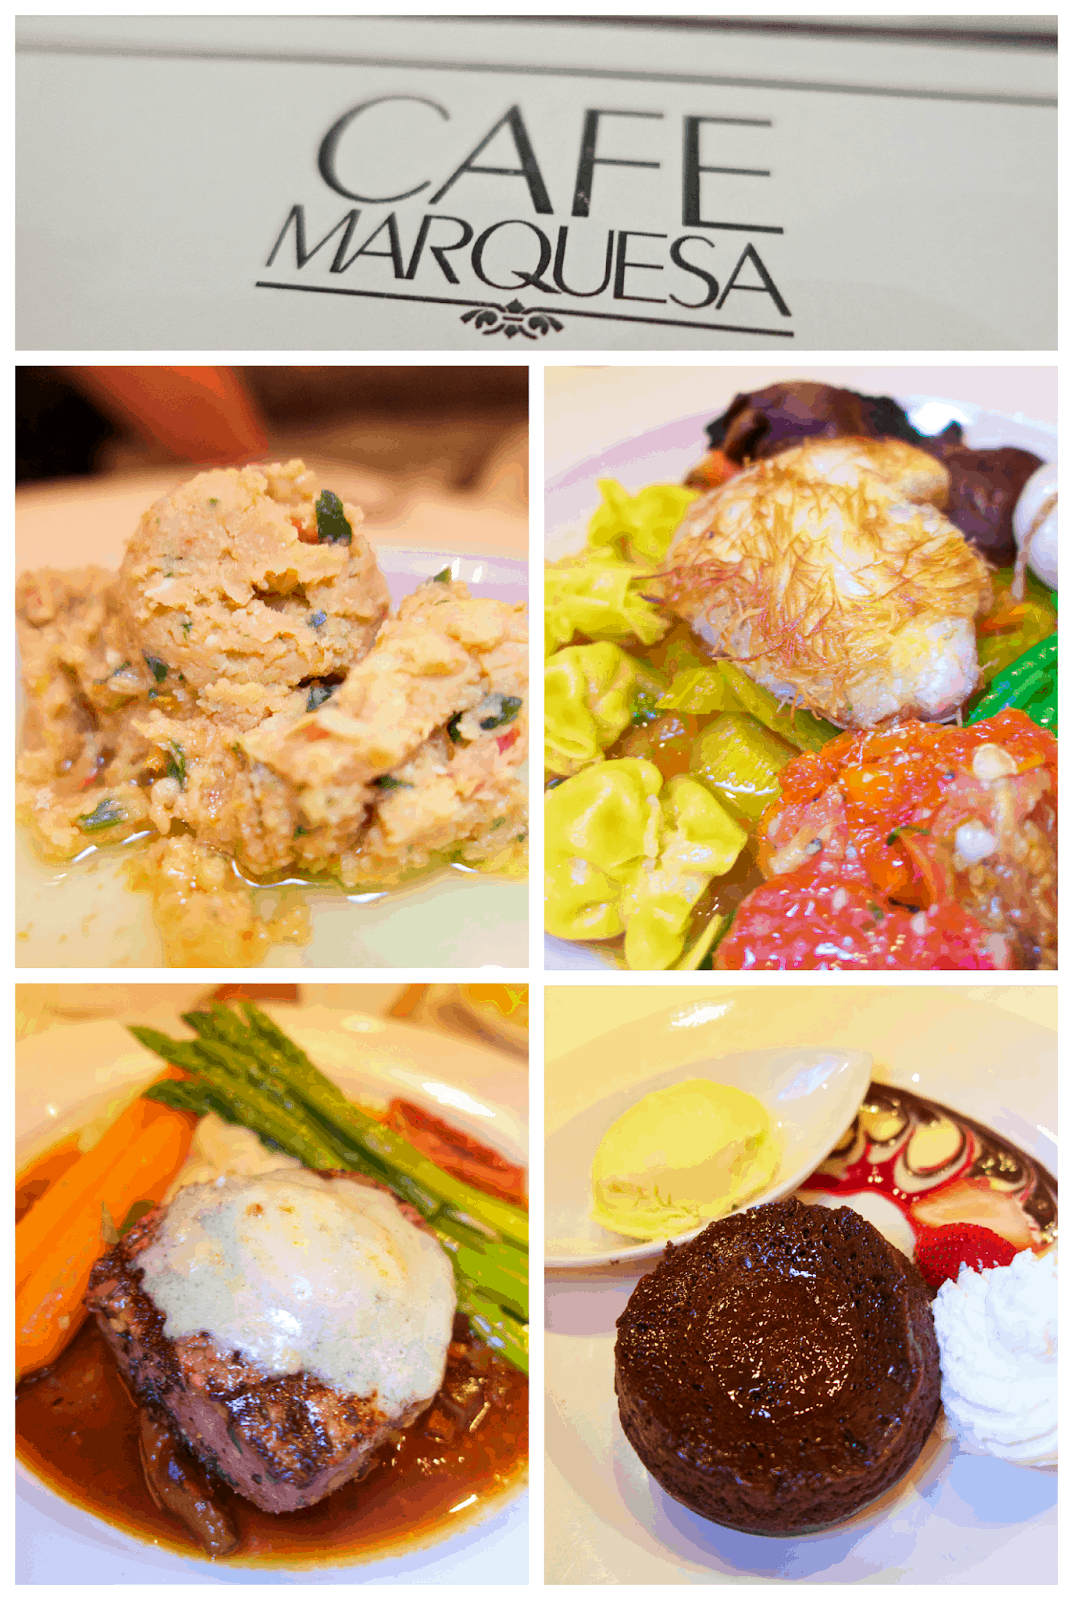 Cafe Marquesa, Key West, FL - Zagat's highest rated restaurant in Key West. Amazing food. A must visit when in Key West!